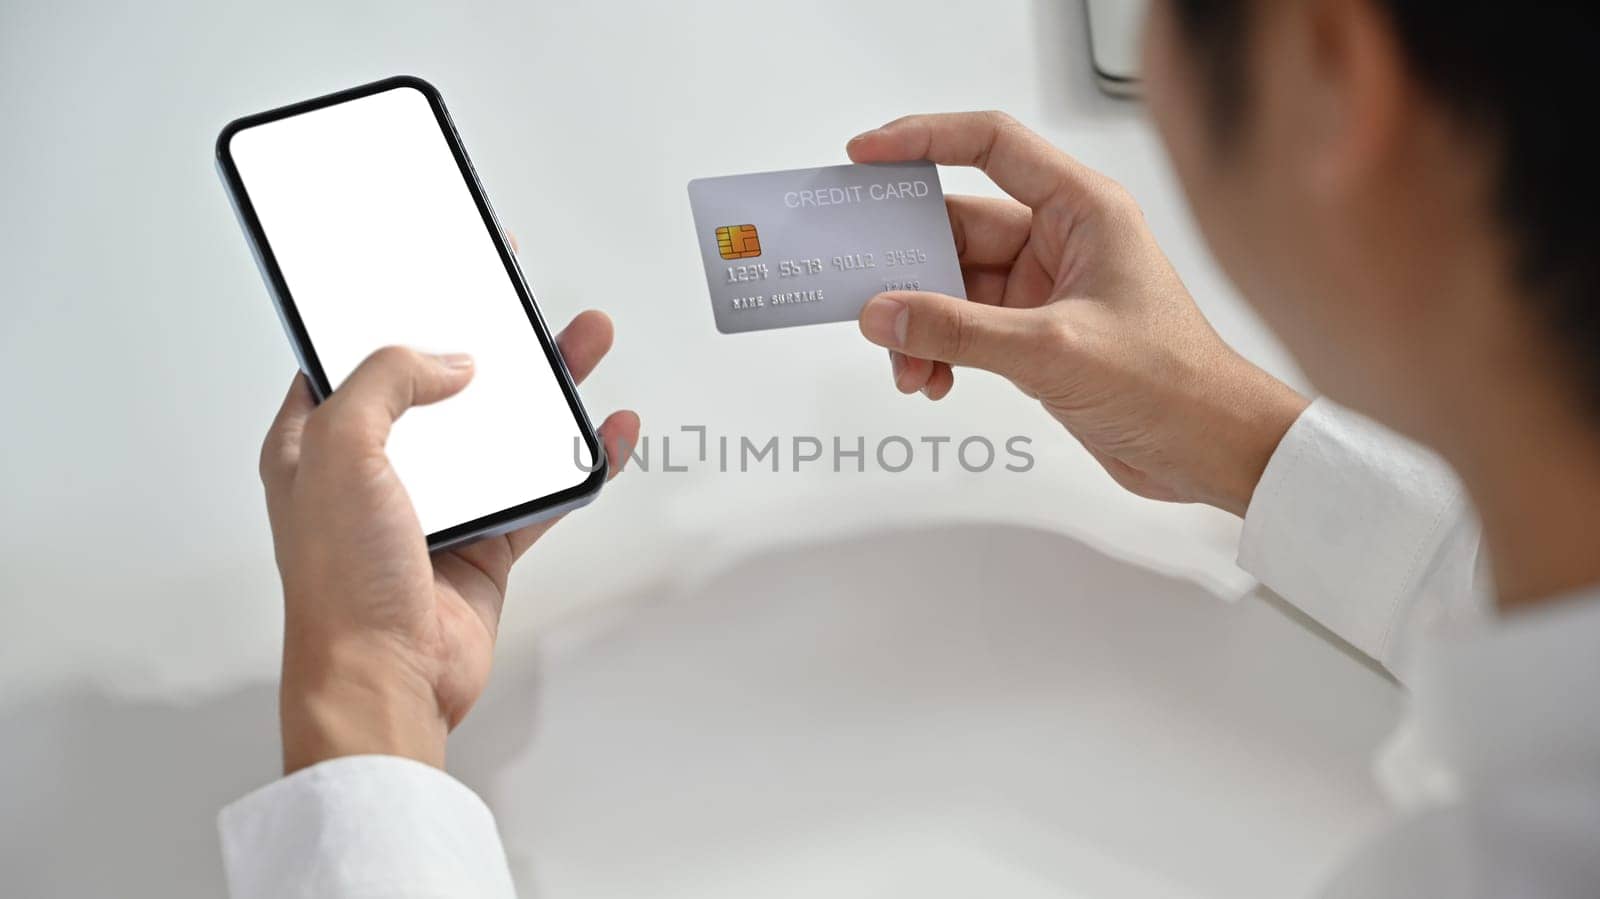 Over shoulder view of man holding credit card and smartphone, shopping online or doing online banking transaction by prathanchorruangsak